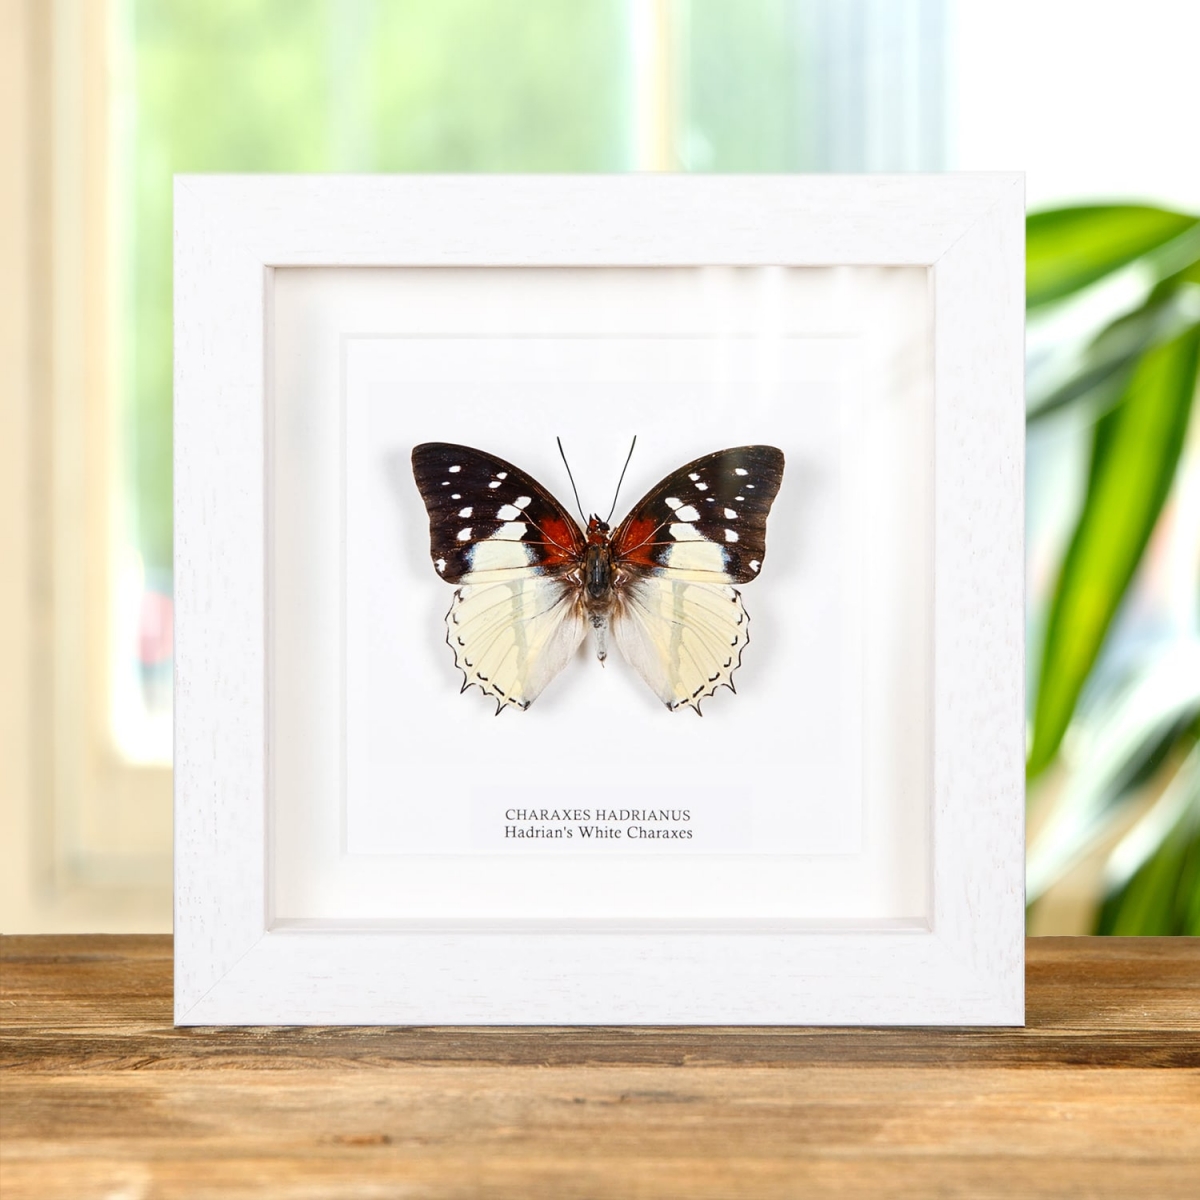 Hadrian's White Charaxes Butterfly In Box Frame (Charaxes hadrianus)